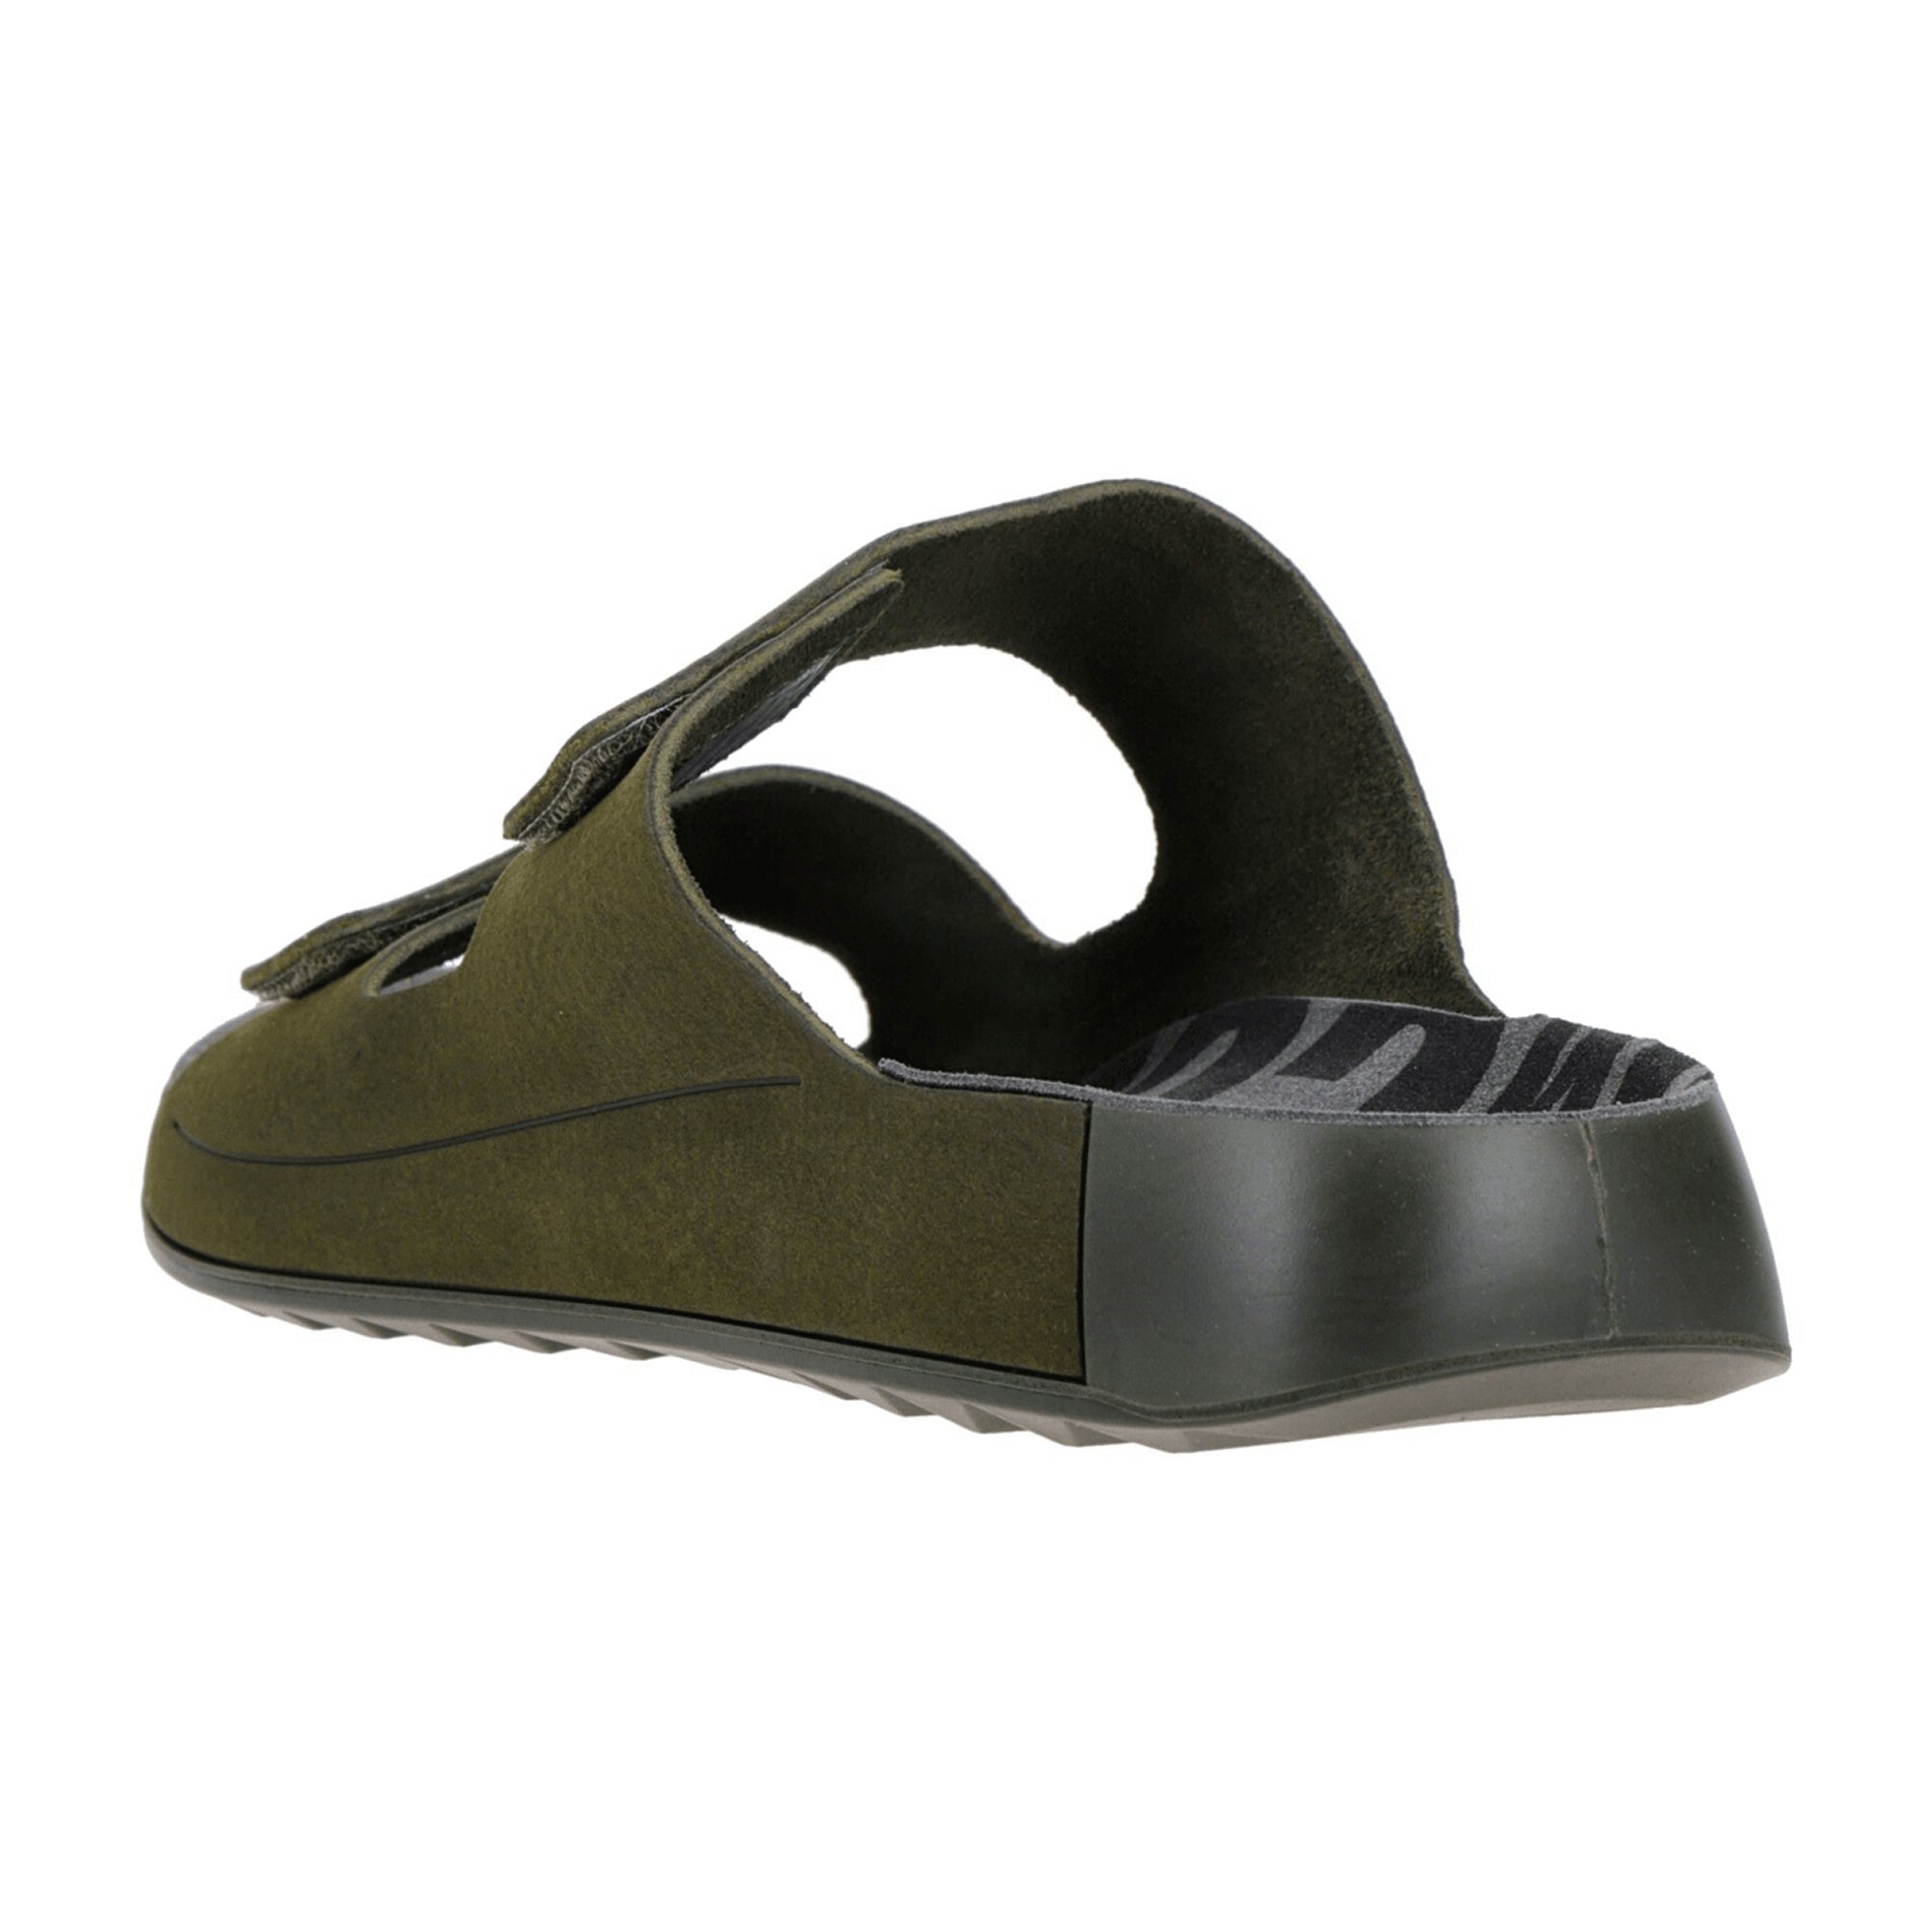 Ecco 2nd Cozmo M Men's Sandals in Grape Leaf Green - Stylish & Durable